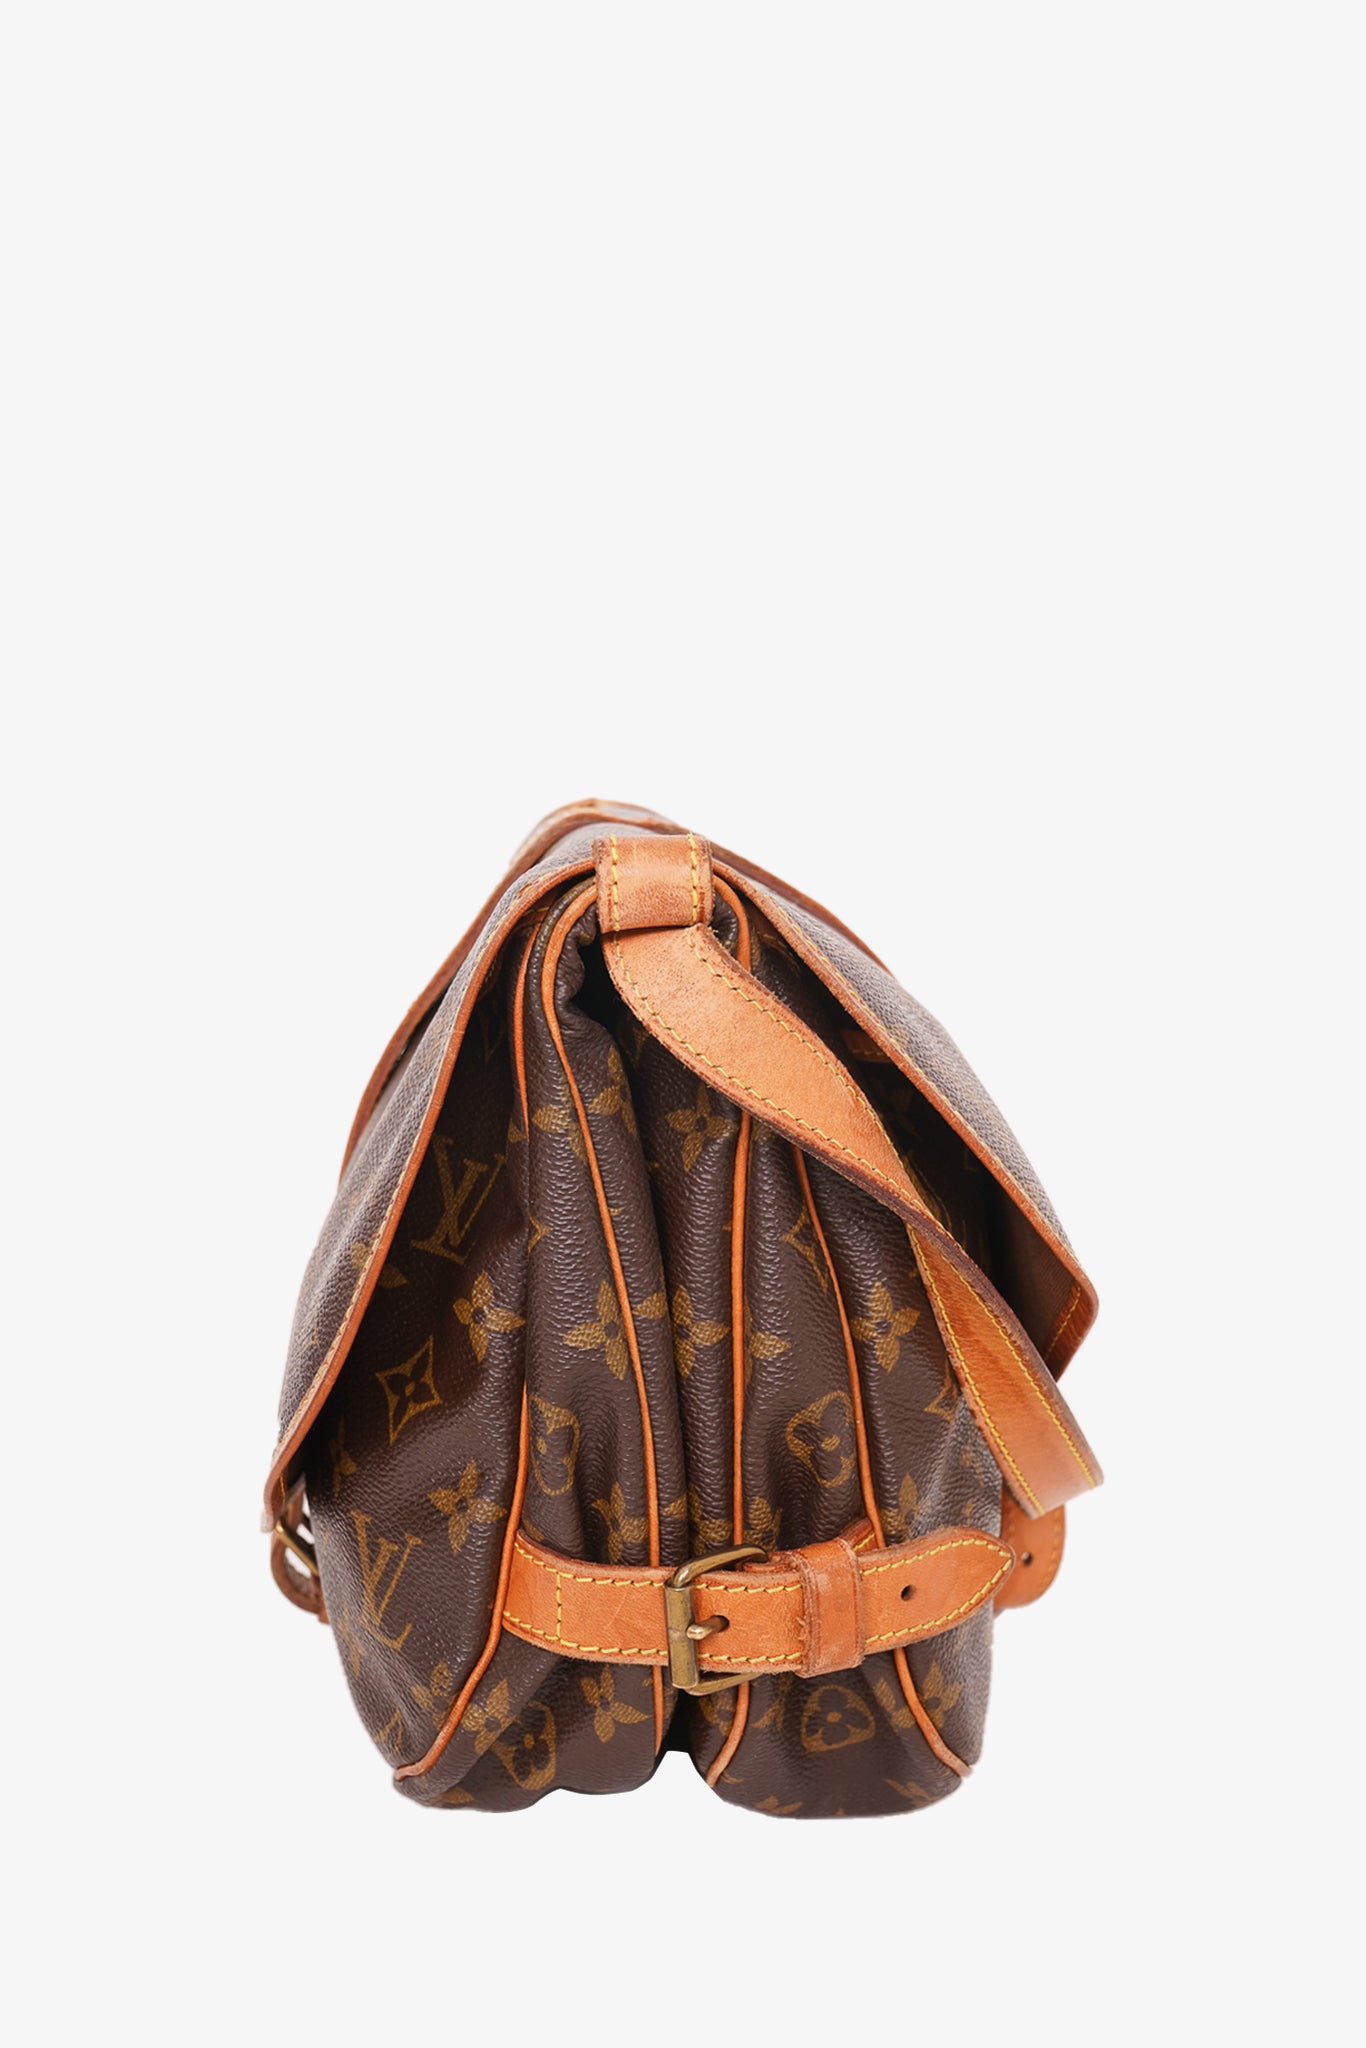 Papillon trunk leather handbag Louis Vuitton Brown in Leather - 28331069